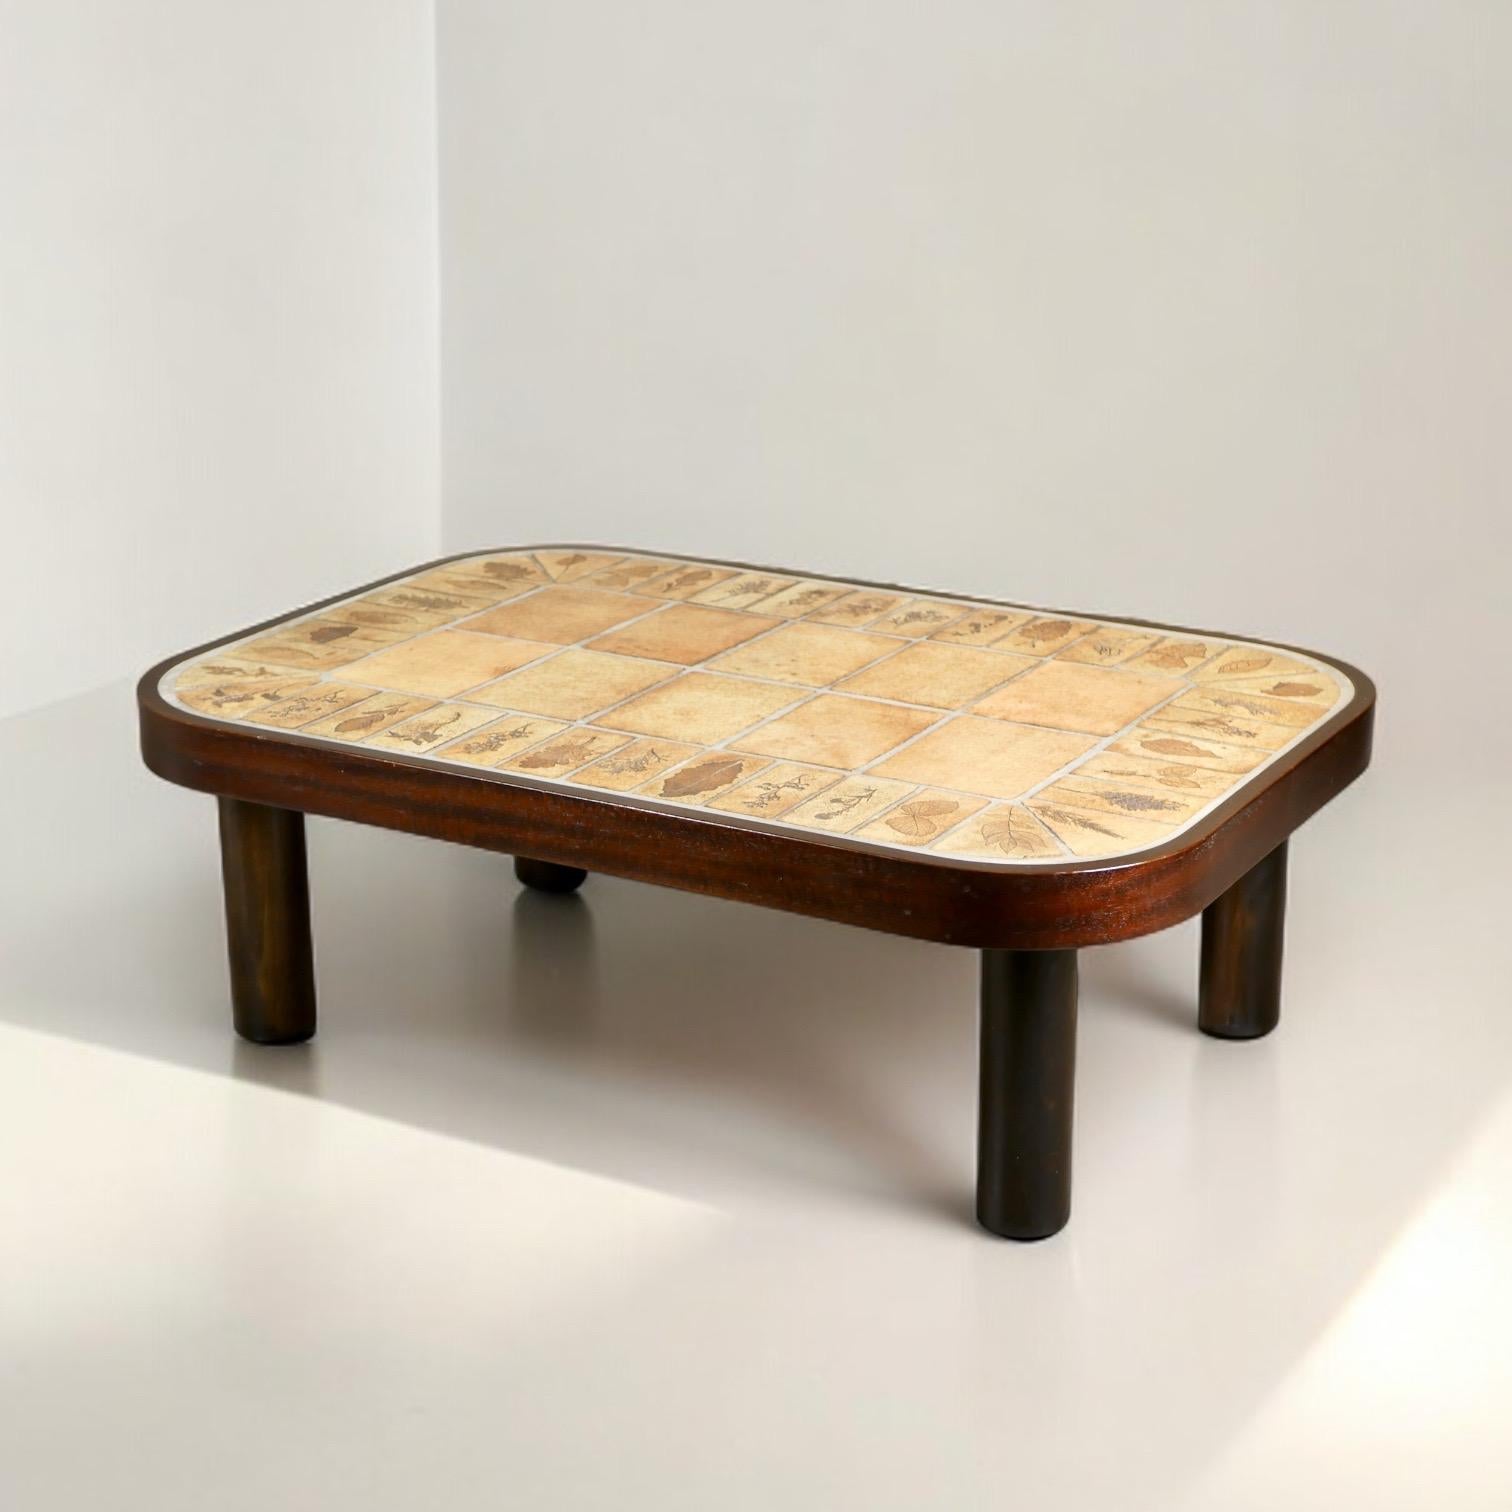 Ceramic and wood coffee table, made by Roger Capron in the end of the 1960s.
It is part of the 